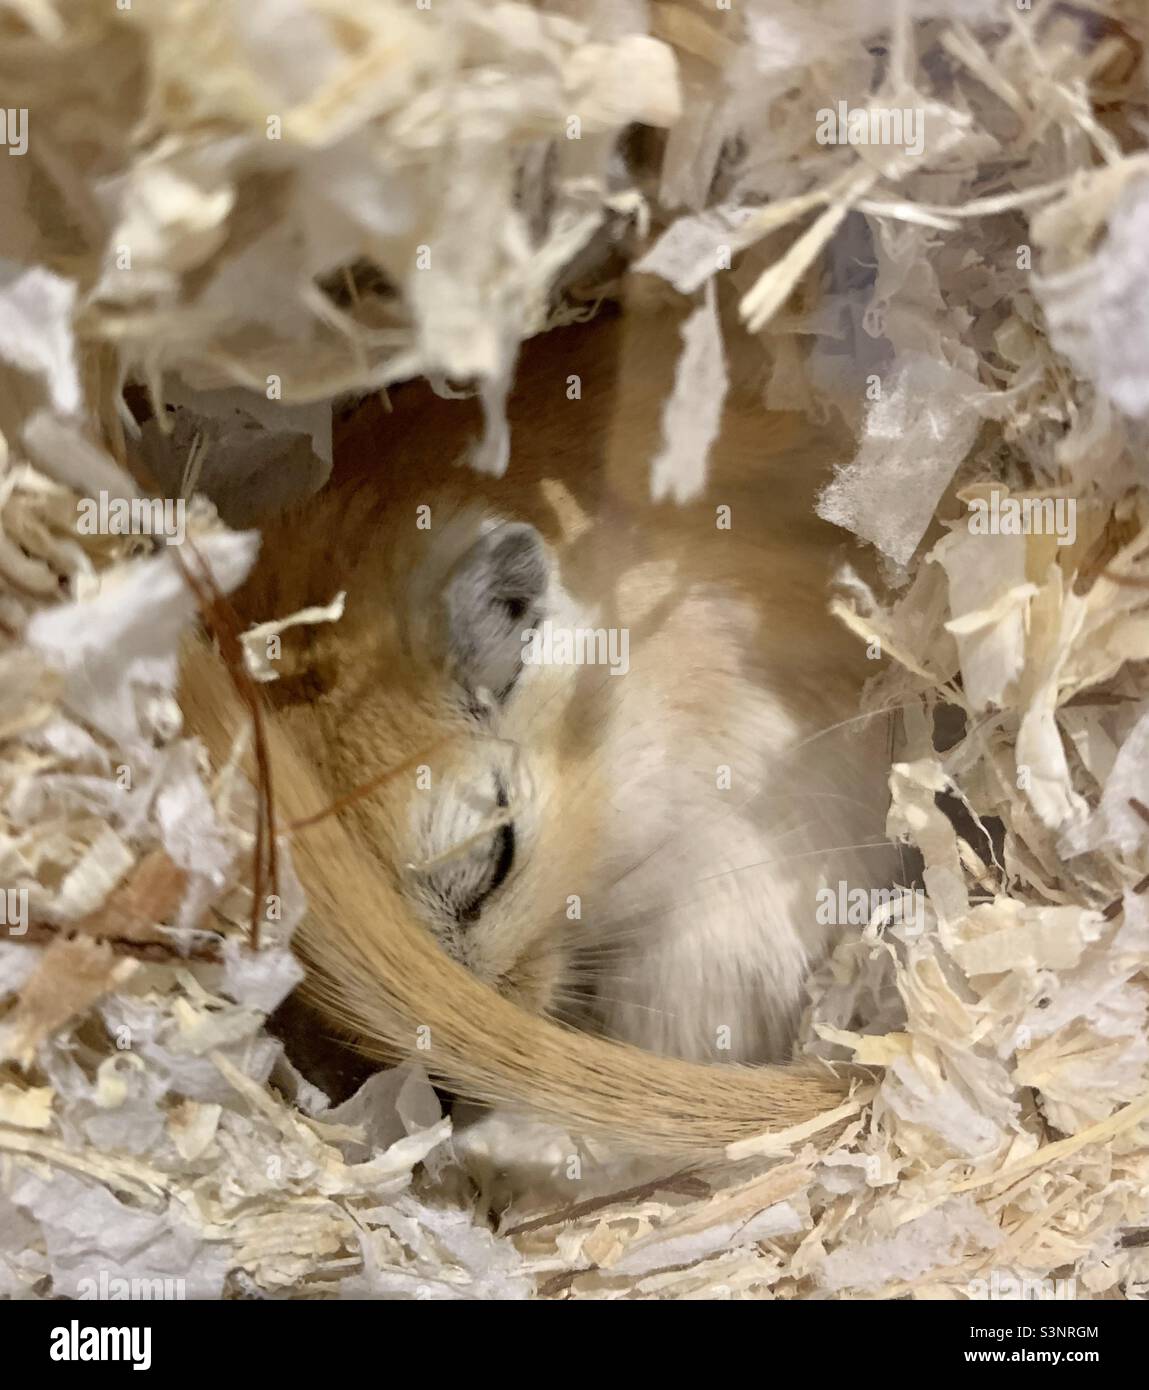 Gerbil curled up asleep in it’s nest Stock Photo